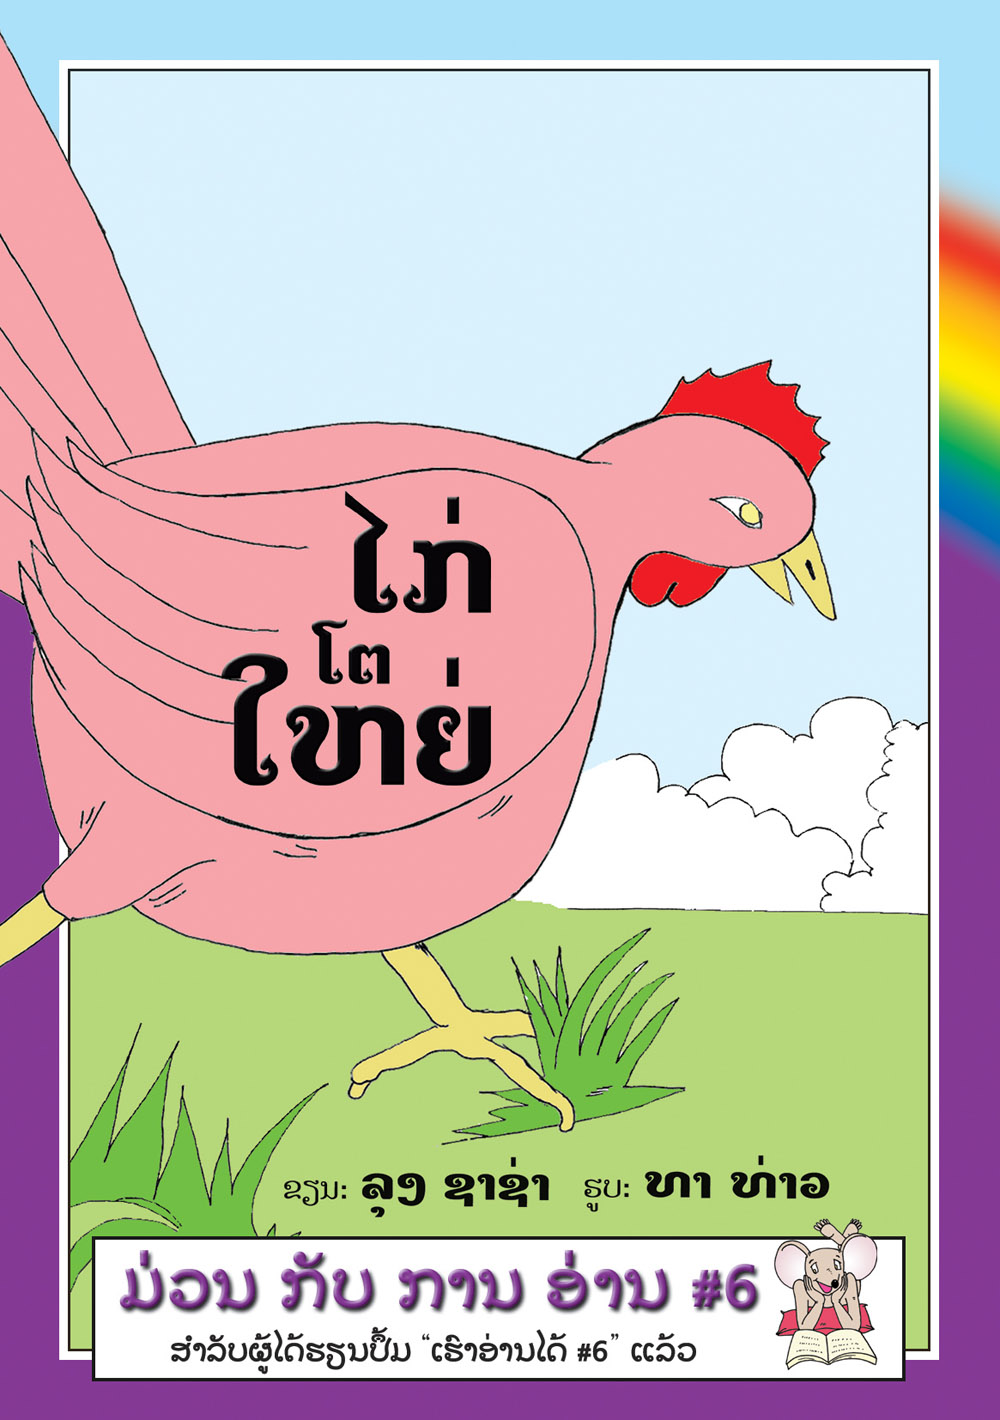 The Big Chicken large book cover, published in Lao language